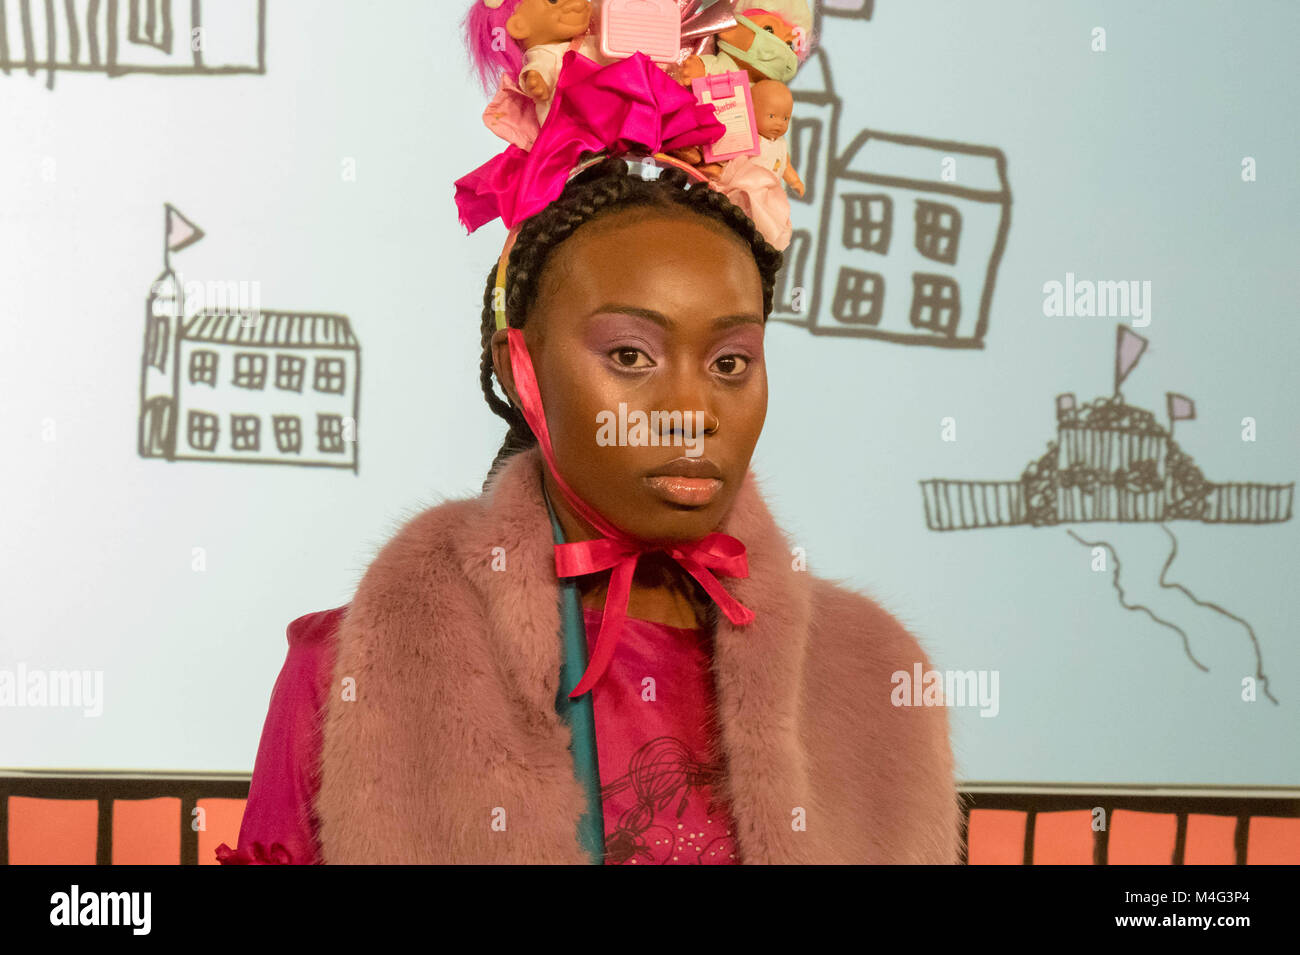 London, UK. 16th February 2018; Amy Thomson's presentation at Fashion Scout for London Fashion Week, she is one of the leading up and coming conceptual designers in the UK Credit: Ian Davidson/Alamy Live News Stock Photo